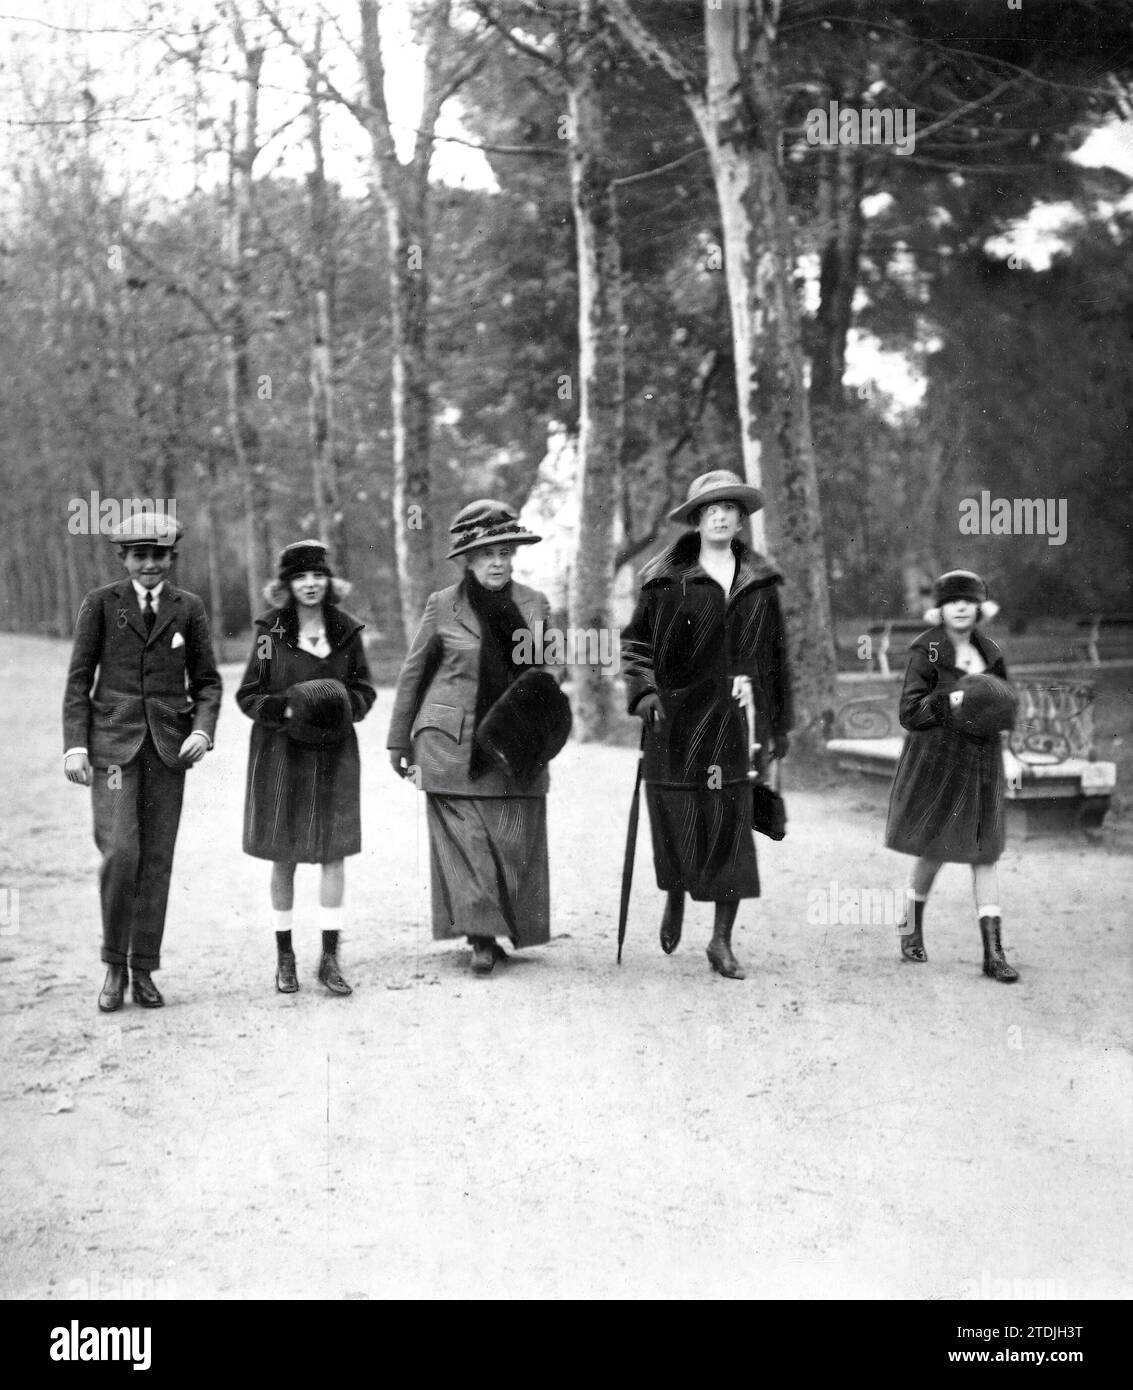 12/28/1920. Madrid, in the Retiro park. HM Queen Victoria (1) with her mother Princess Beatrice of Battenberg (2) and Ss. Ah. the Infantes D. Jaime (3), Doña Beatriz (4) and Doña Cristina (5) during their walk yesterday. Credit: Album / Archivo ABC / Julio Duque Stock Photo